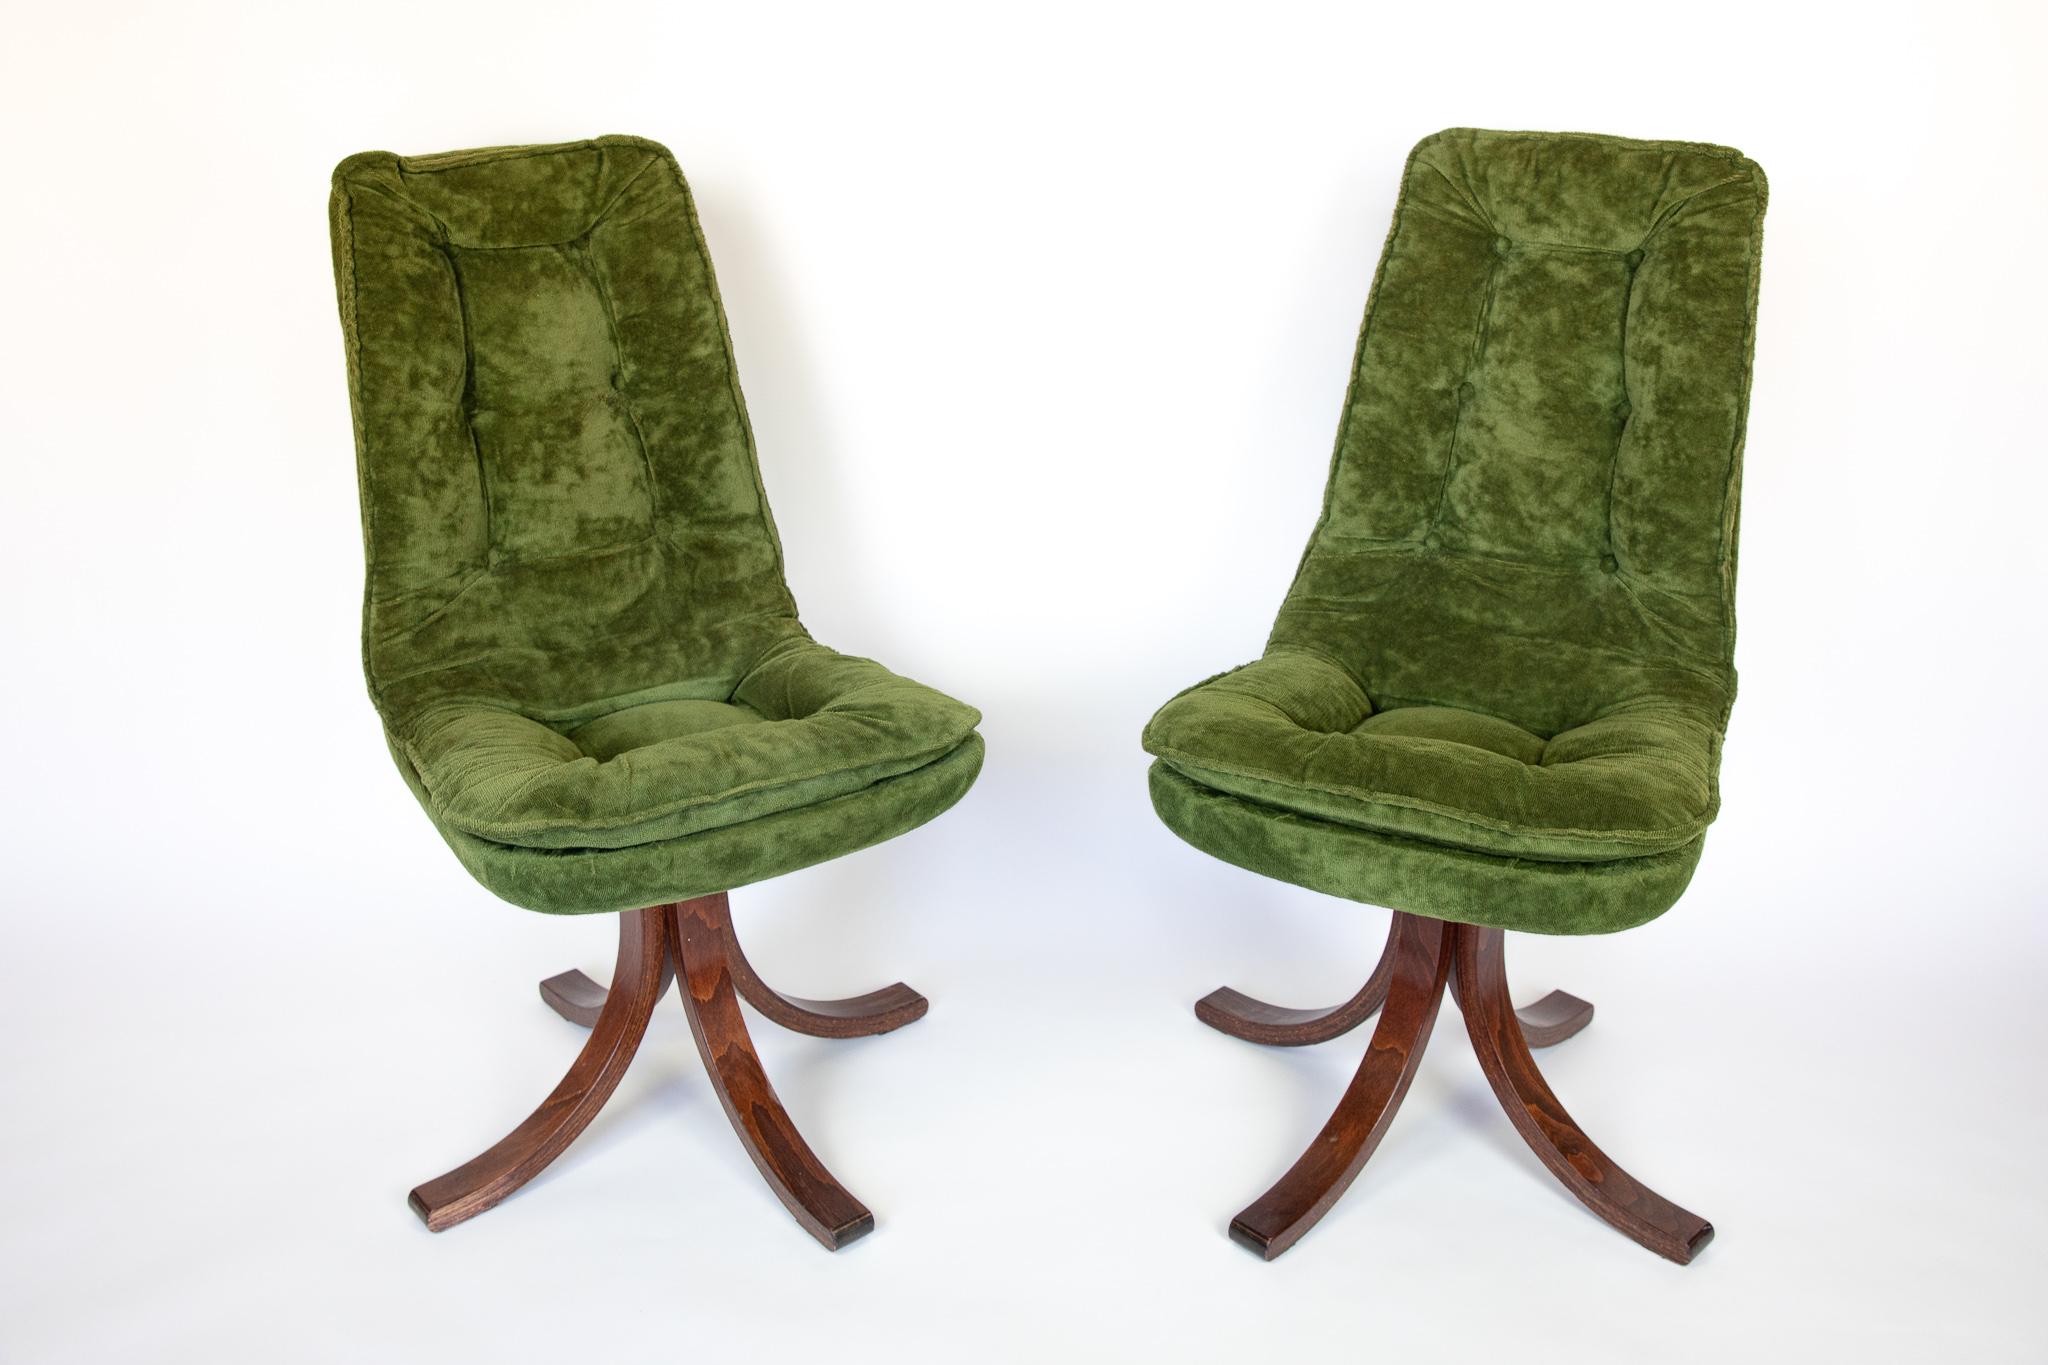 Mid Century Modern Dining Chairs in Green Velvet Upholstery, Italy, 1970s.

Four exquisite dining or lounge chairs with a stunning green velvet upholstery reminiscent of the Italian Space Age designs by Gastone Rinaldi for Rima.
With their green